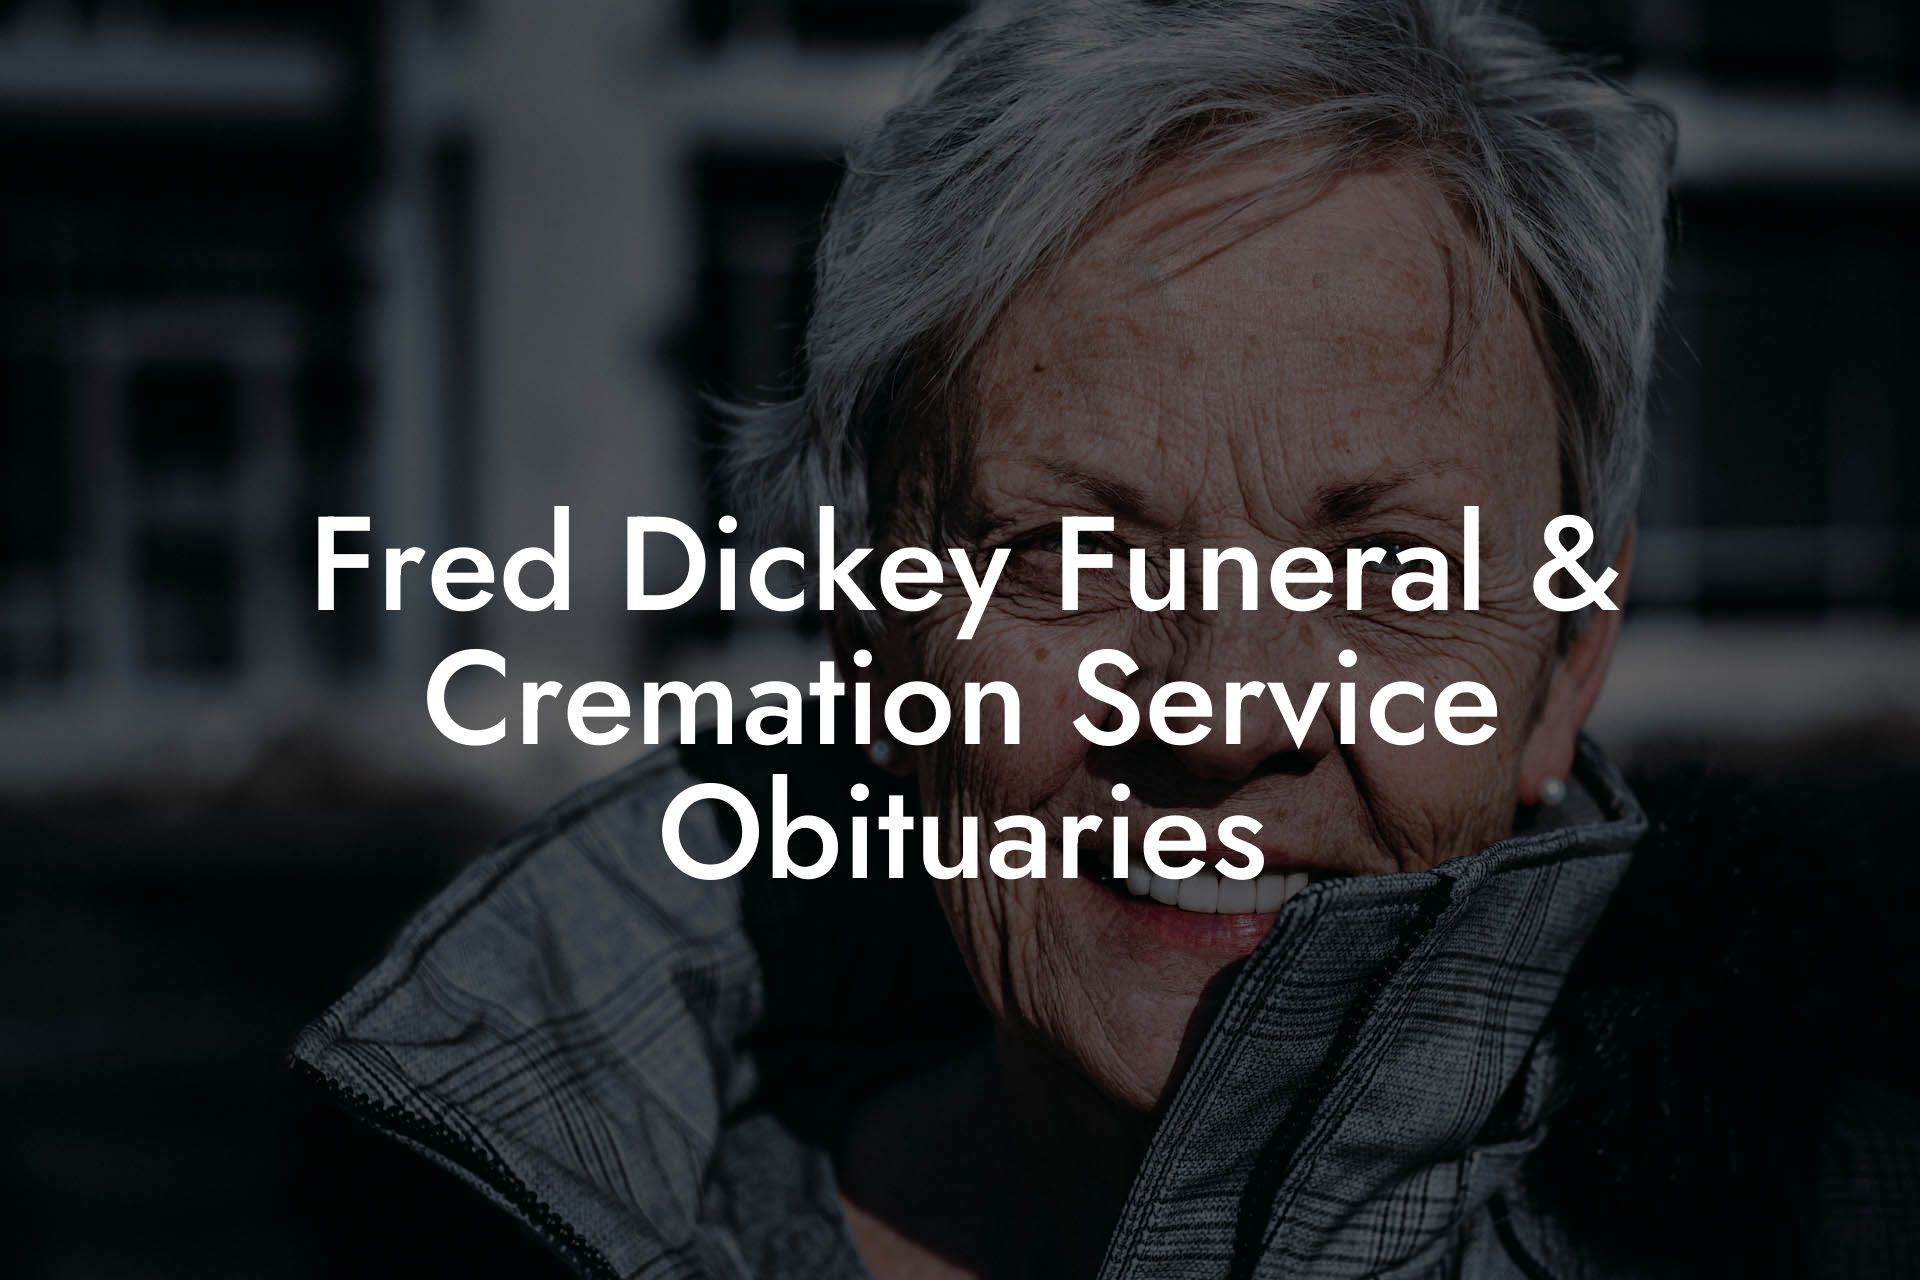 Fred Dickey Funeral & Cremation Service Obituaries